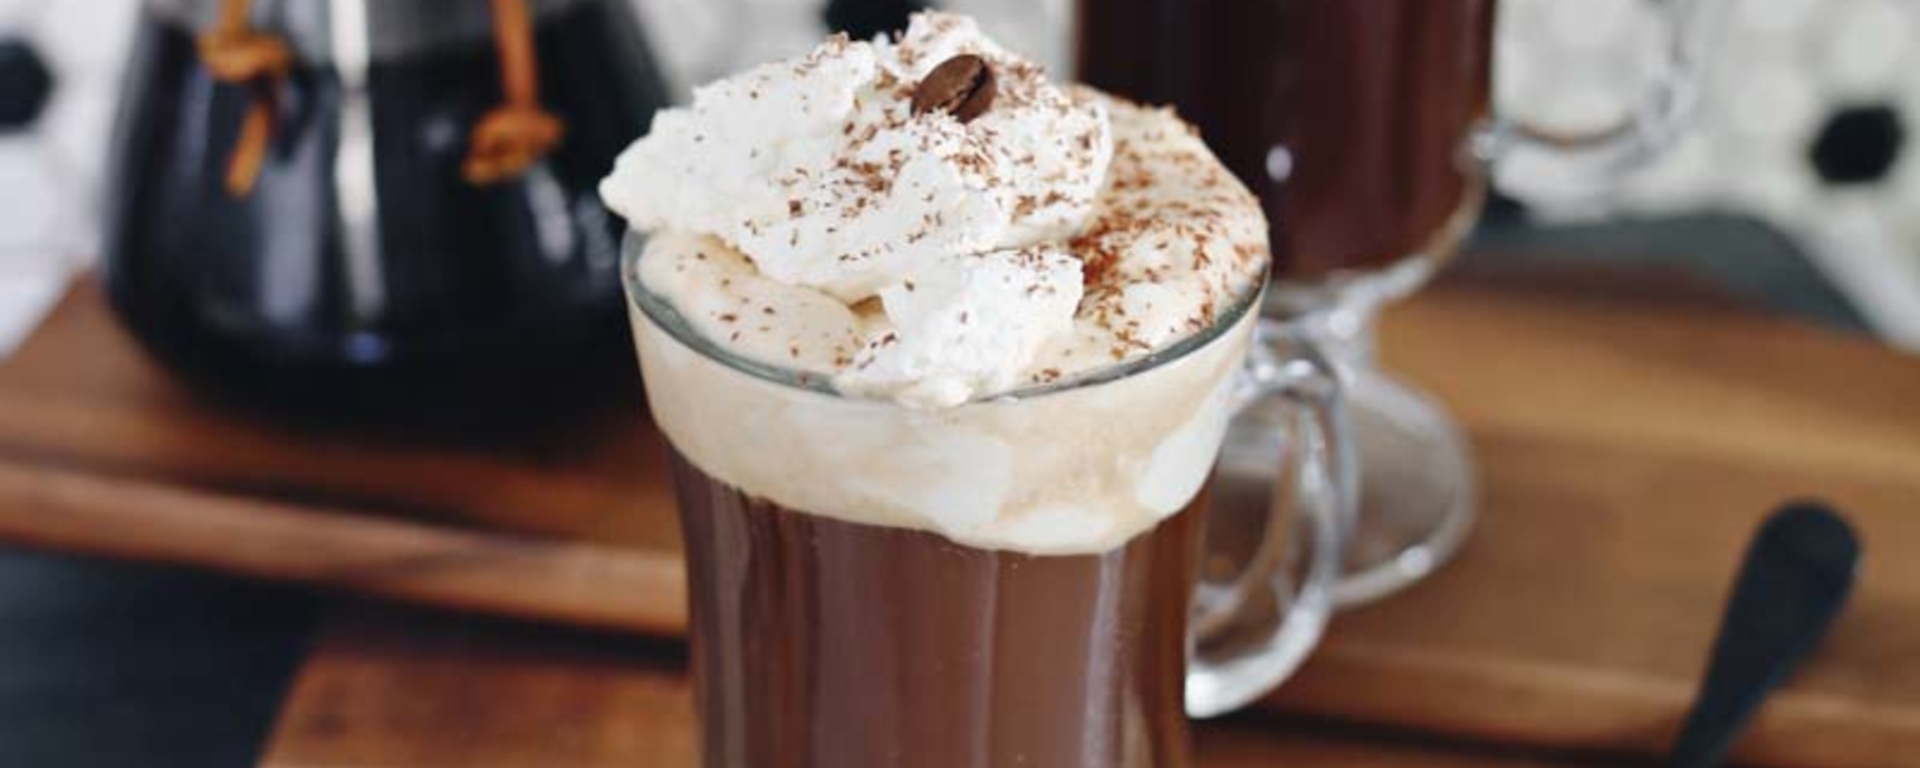 LuvMyRecipe.com - American Q's Bourbon and Bacon Hot Chocolate Featured